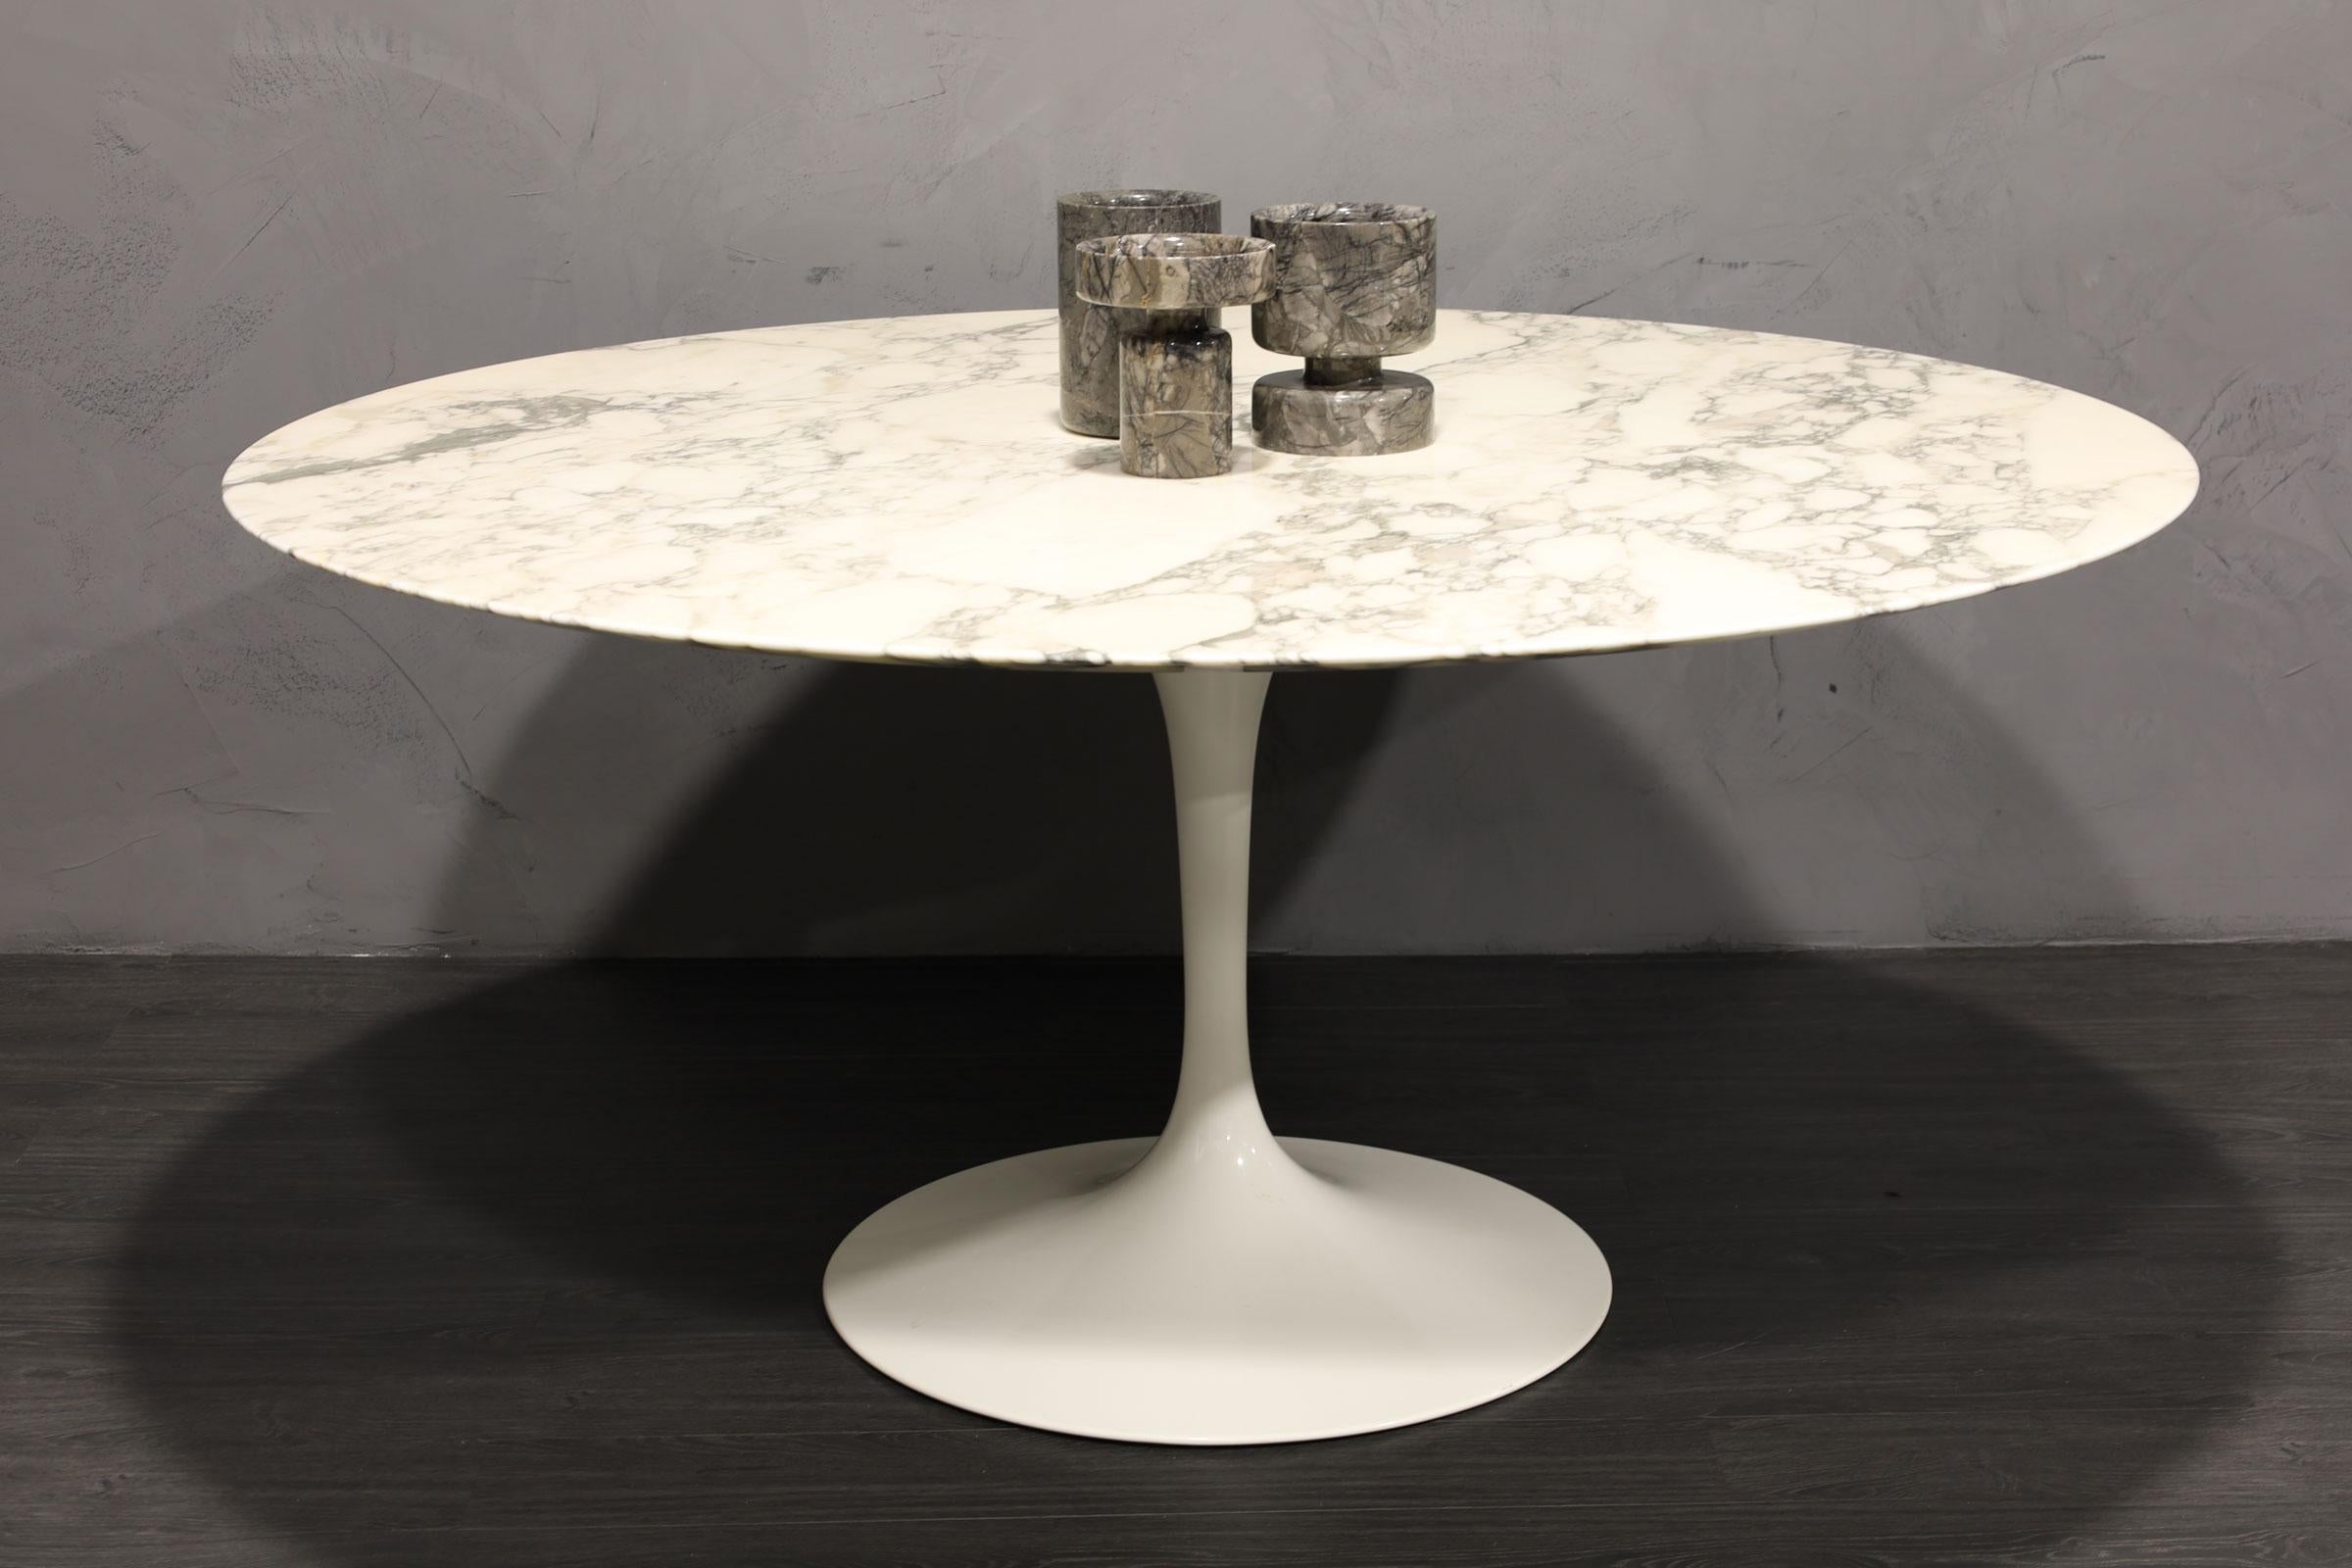 A very gently used Eero Saarinen for Knoll tulip table. In a beautiful Arabescato marble with a white base. This is ready for you immediately!. The image cast a yellowish to the table but it is not yellow at all. See other photos and video. 